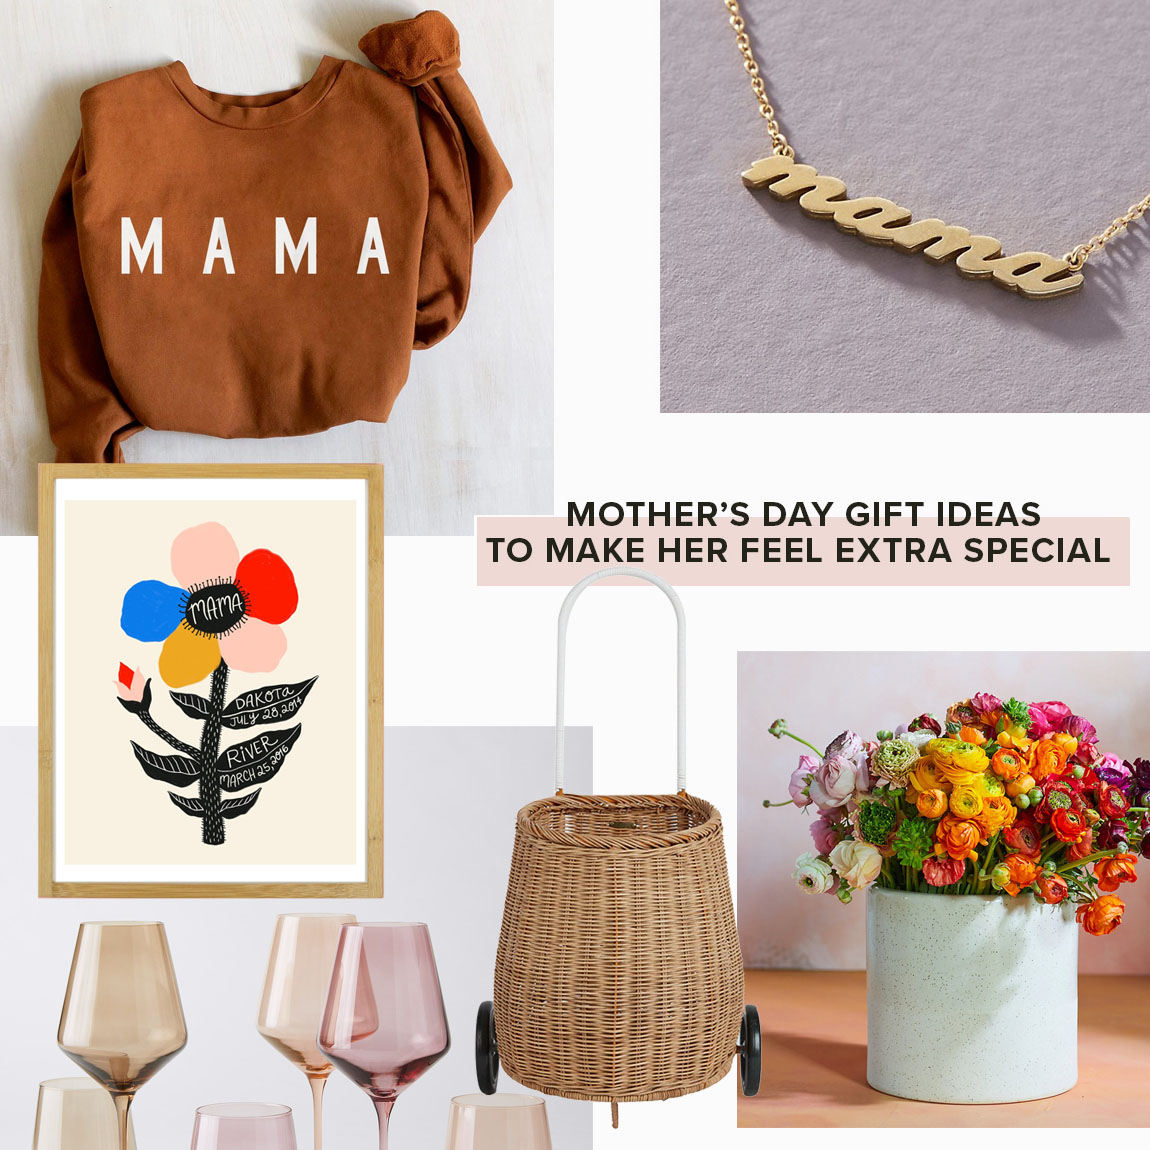 DIY Mother's Day Gift Ideas, Mother's Day 2016!